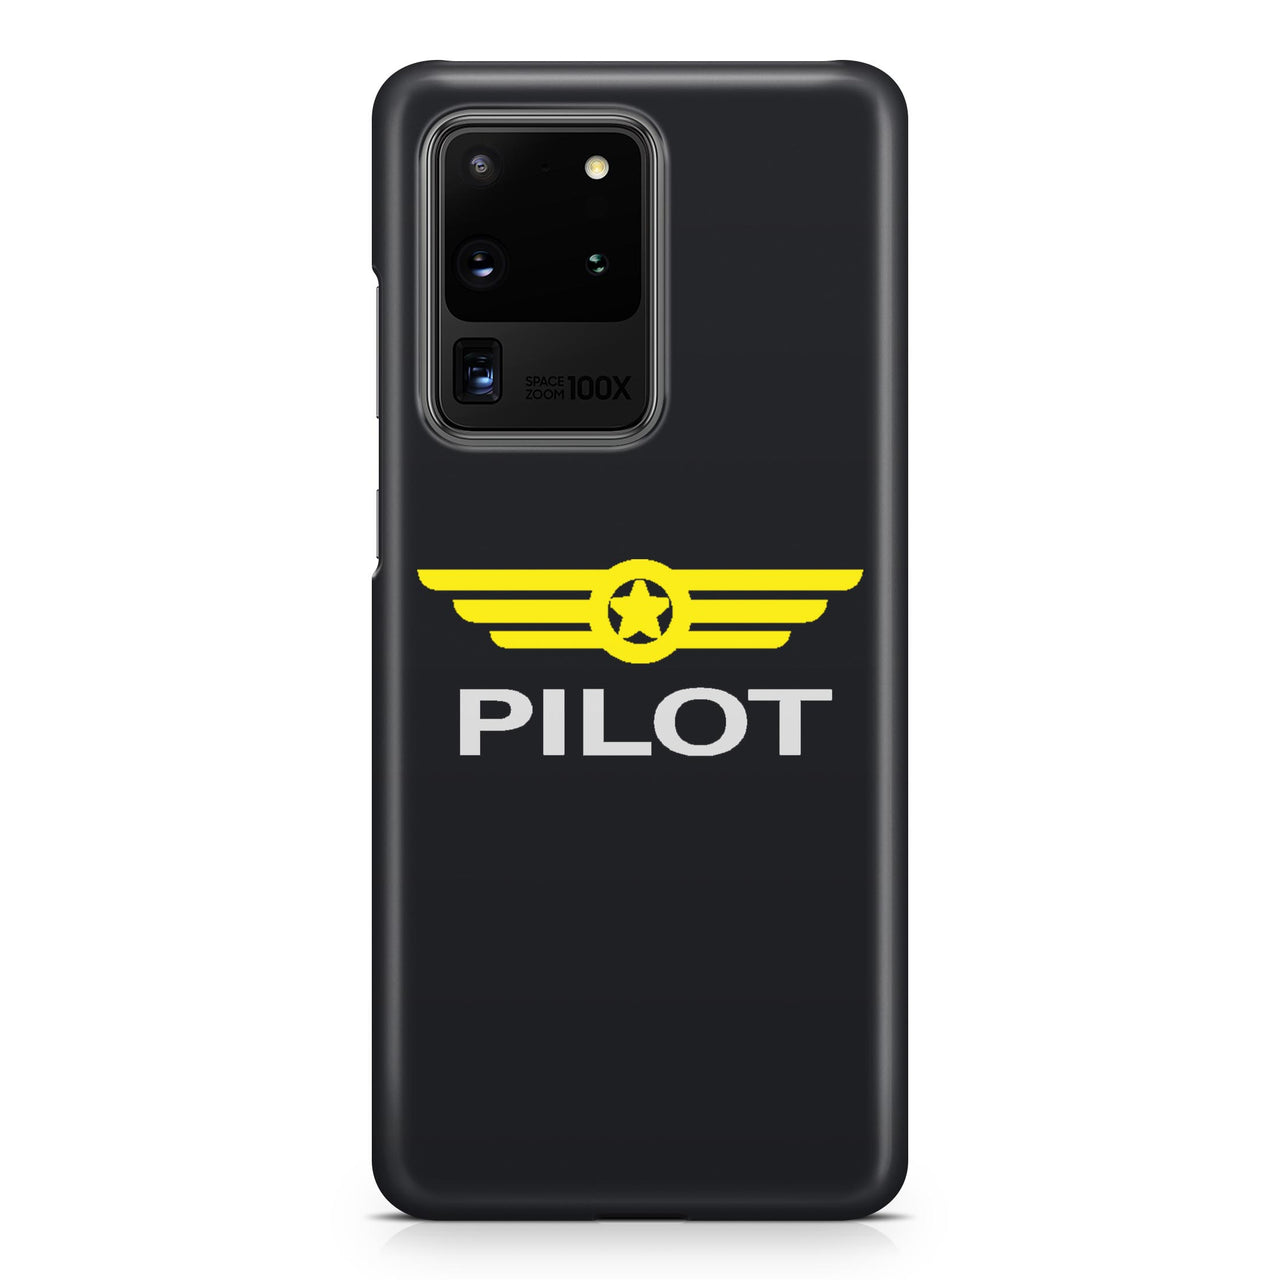 Pilot & Badge (+Customizable Name) Designed Samsung S & Note Cases